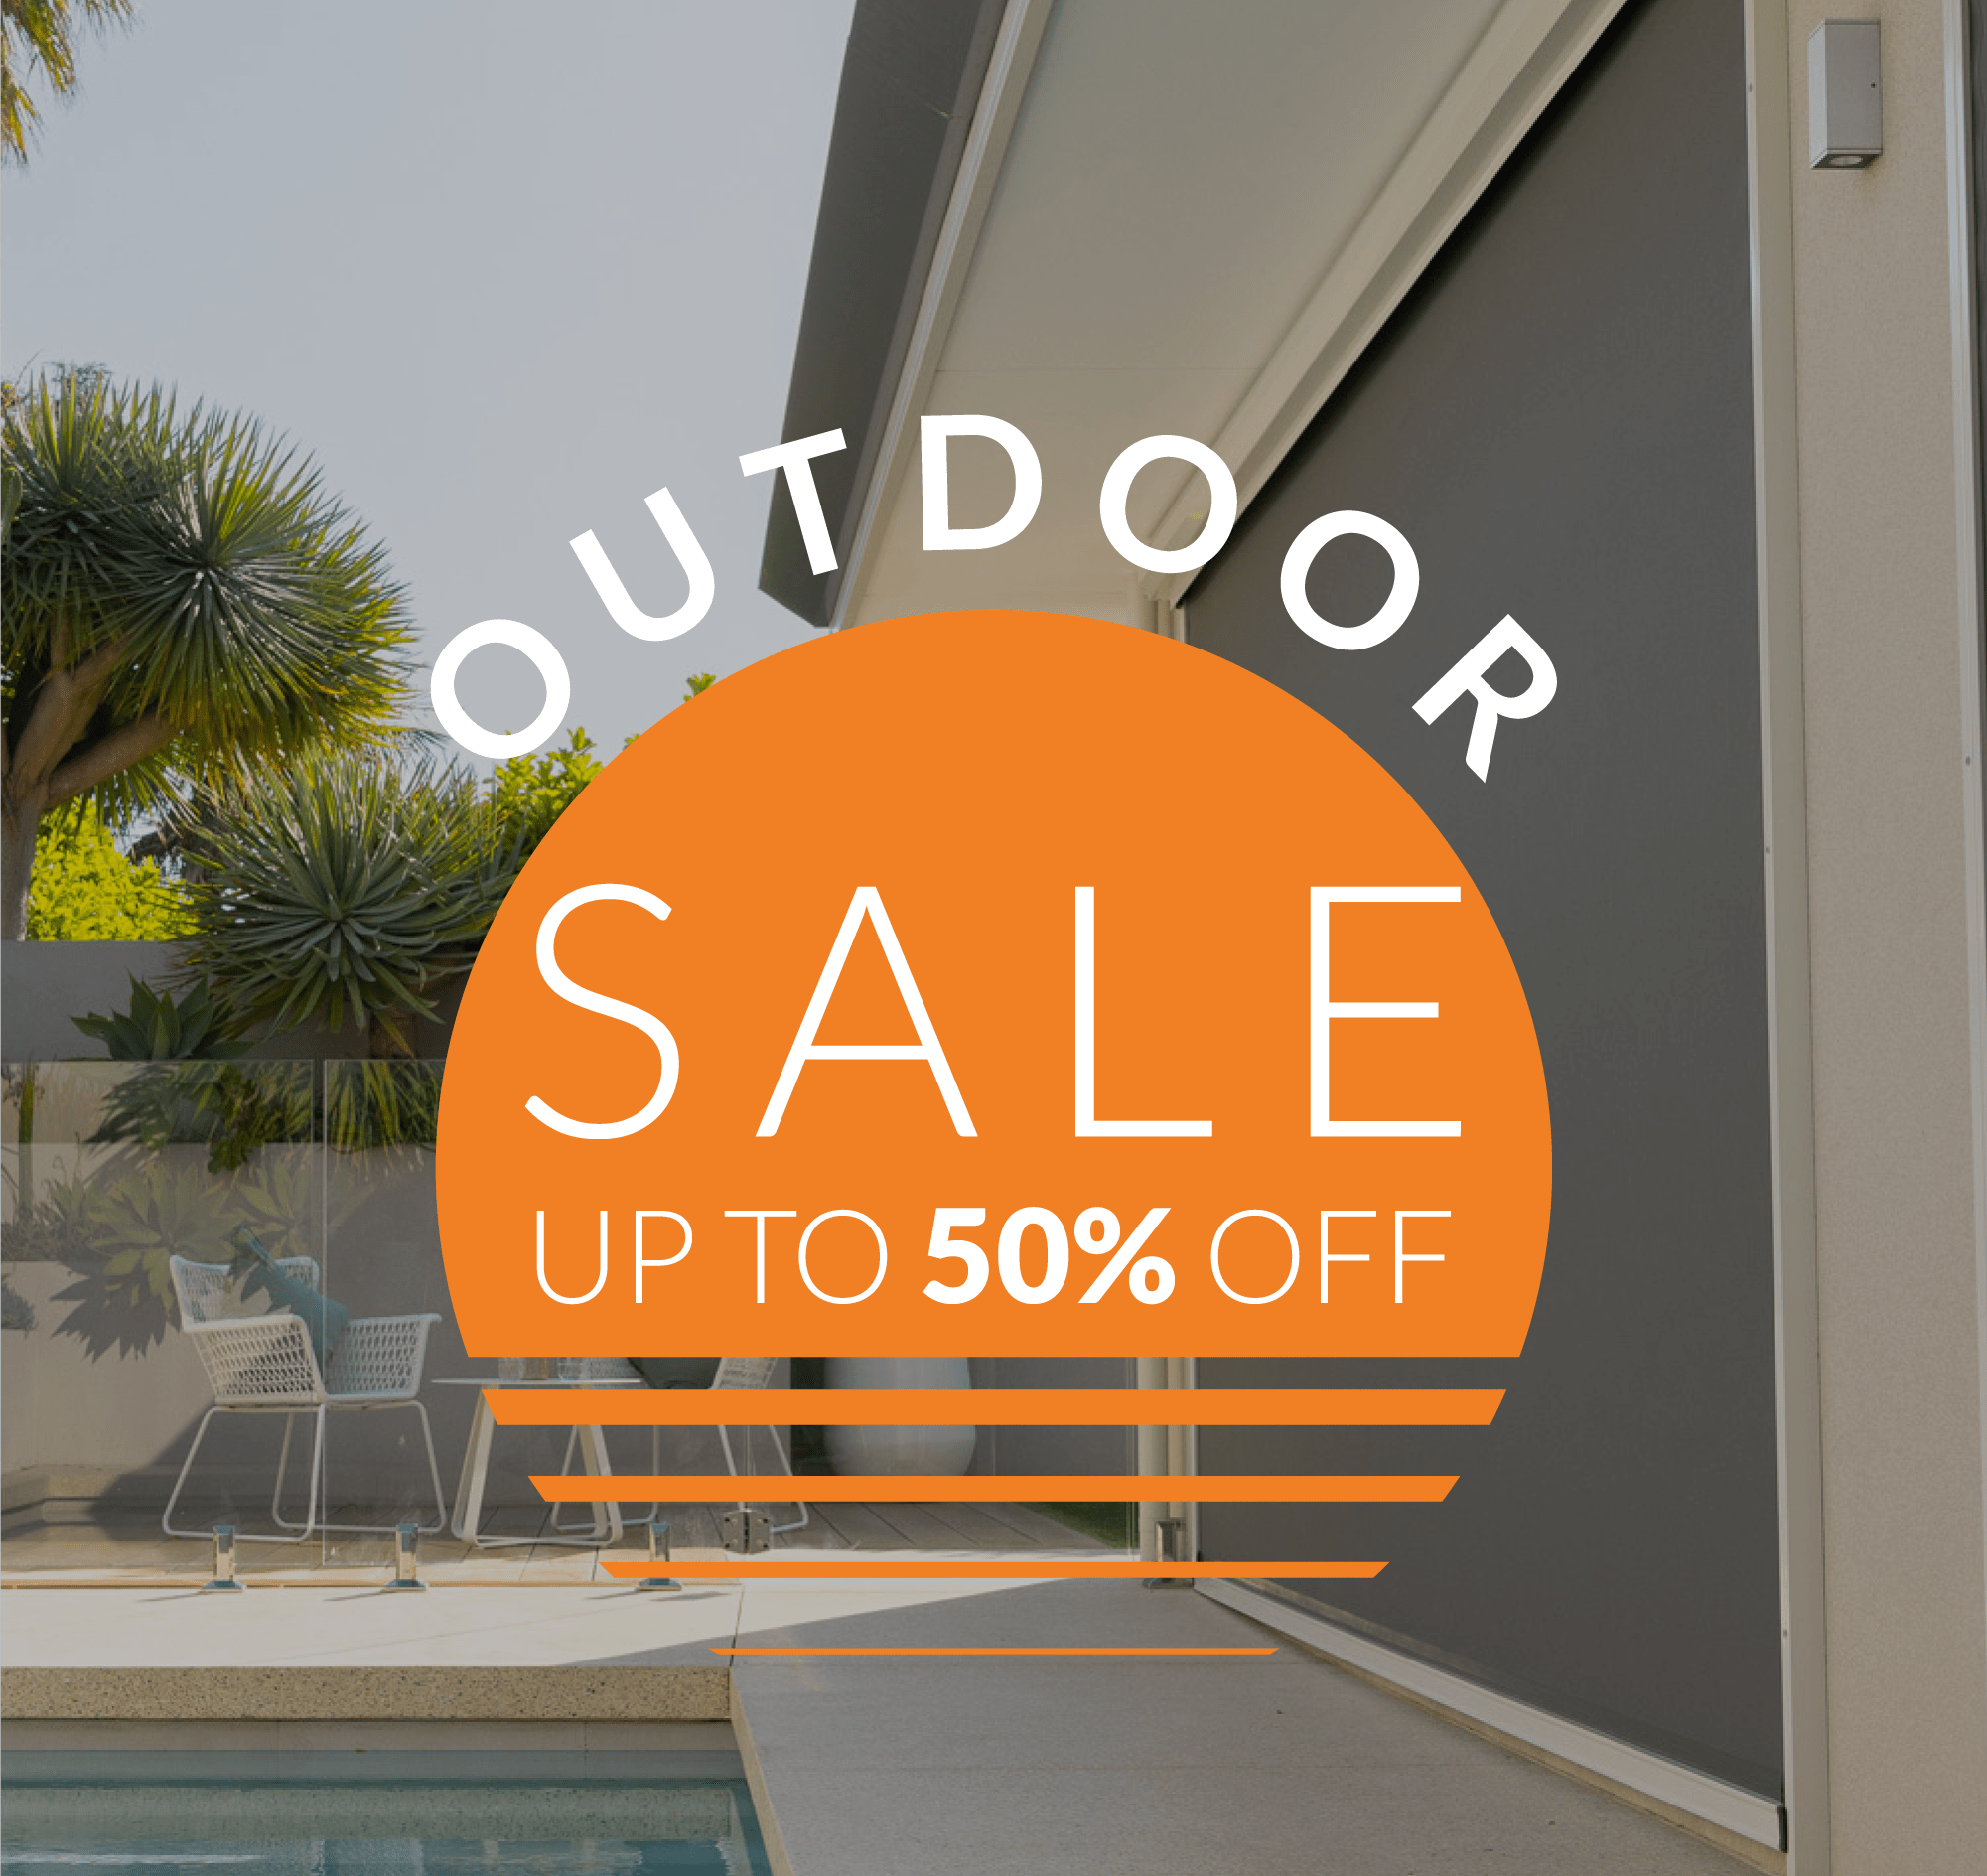 Up to 50% off outdoor sale | The Blinds Gallery